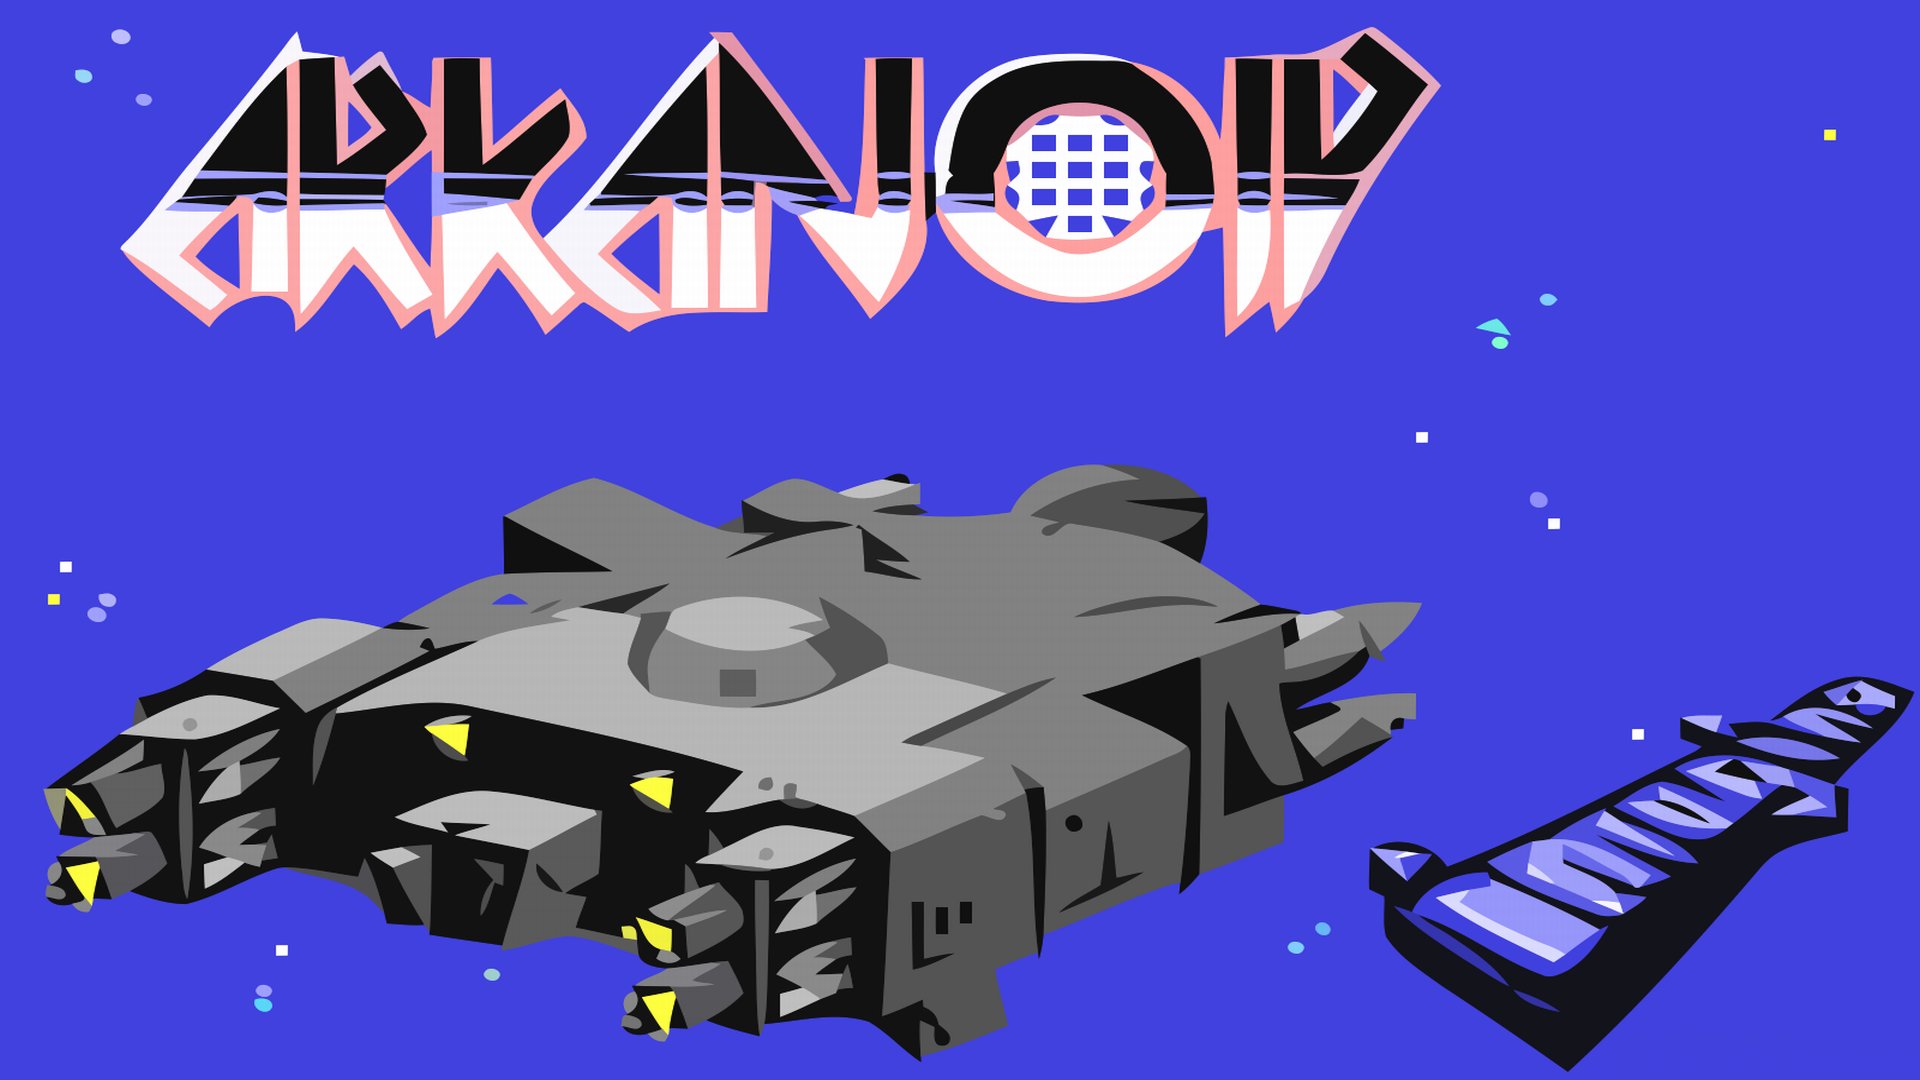 Video Game Arkanoid HD Wallpaper | Background Image